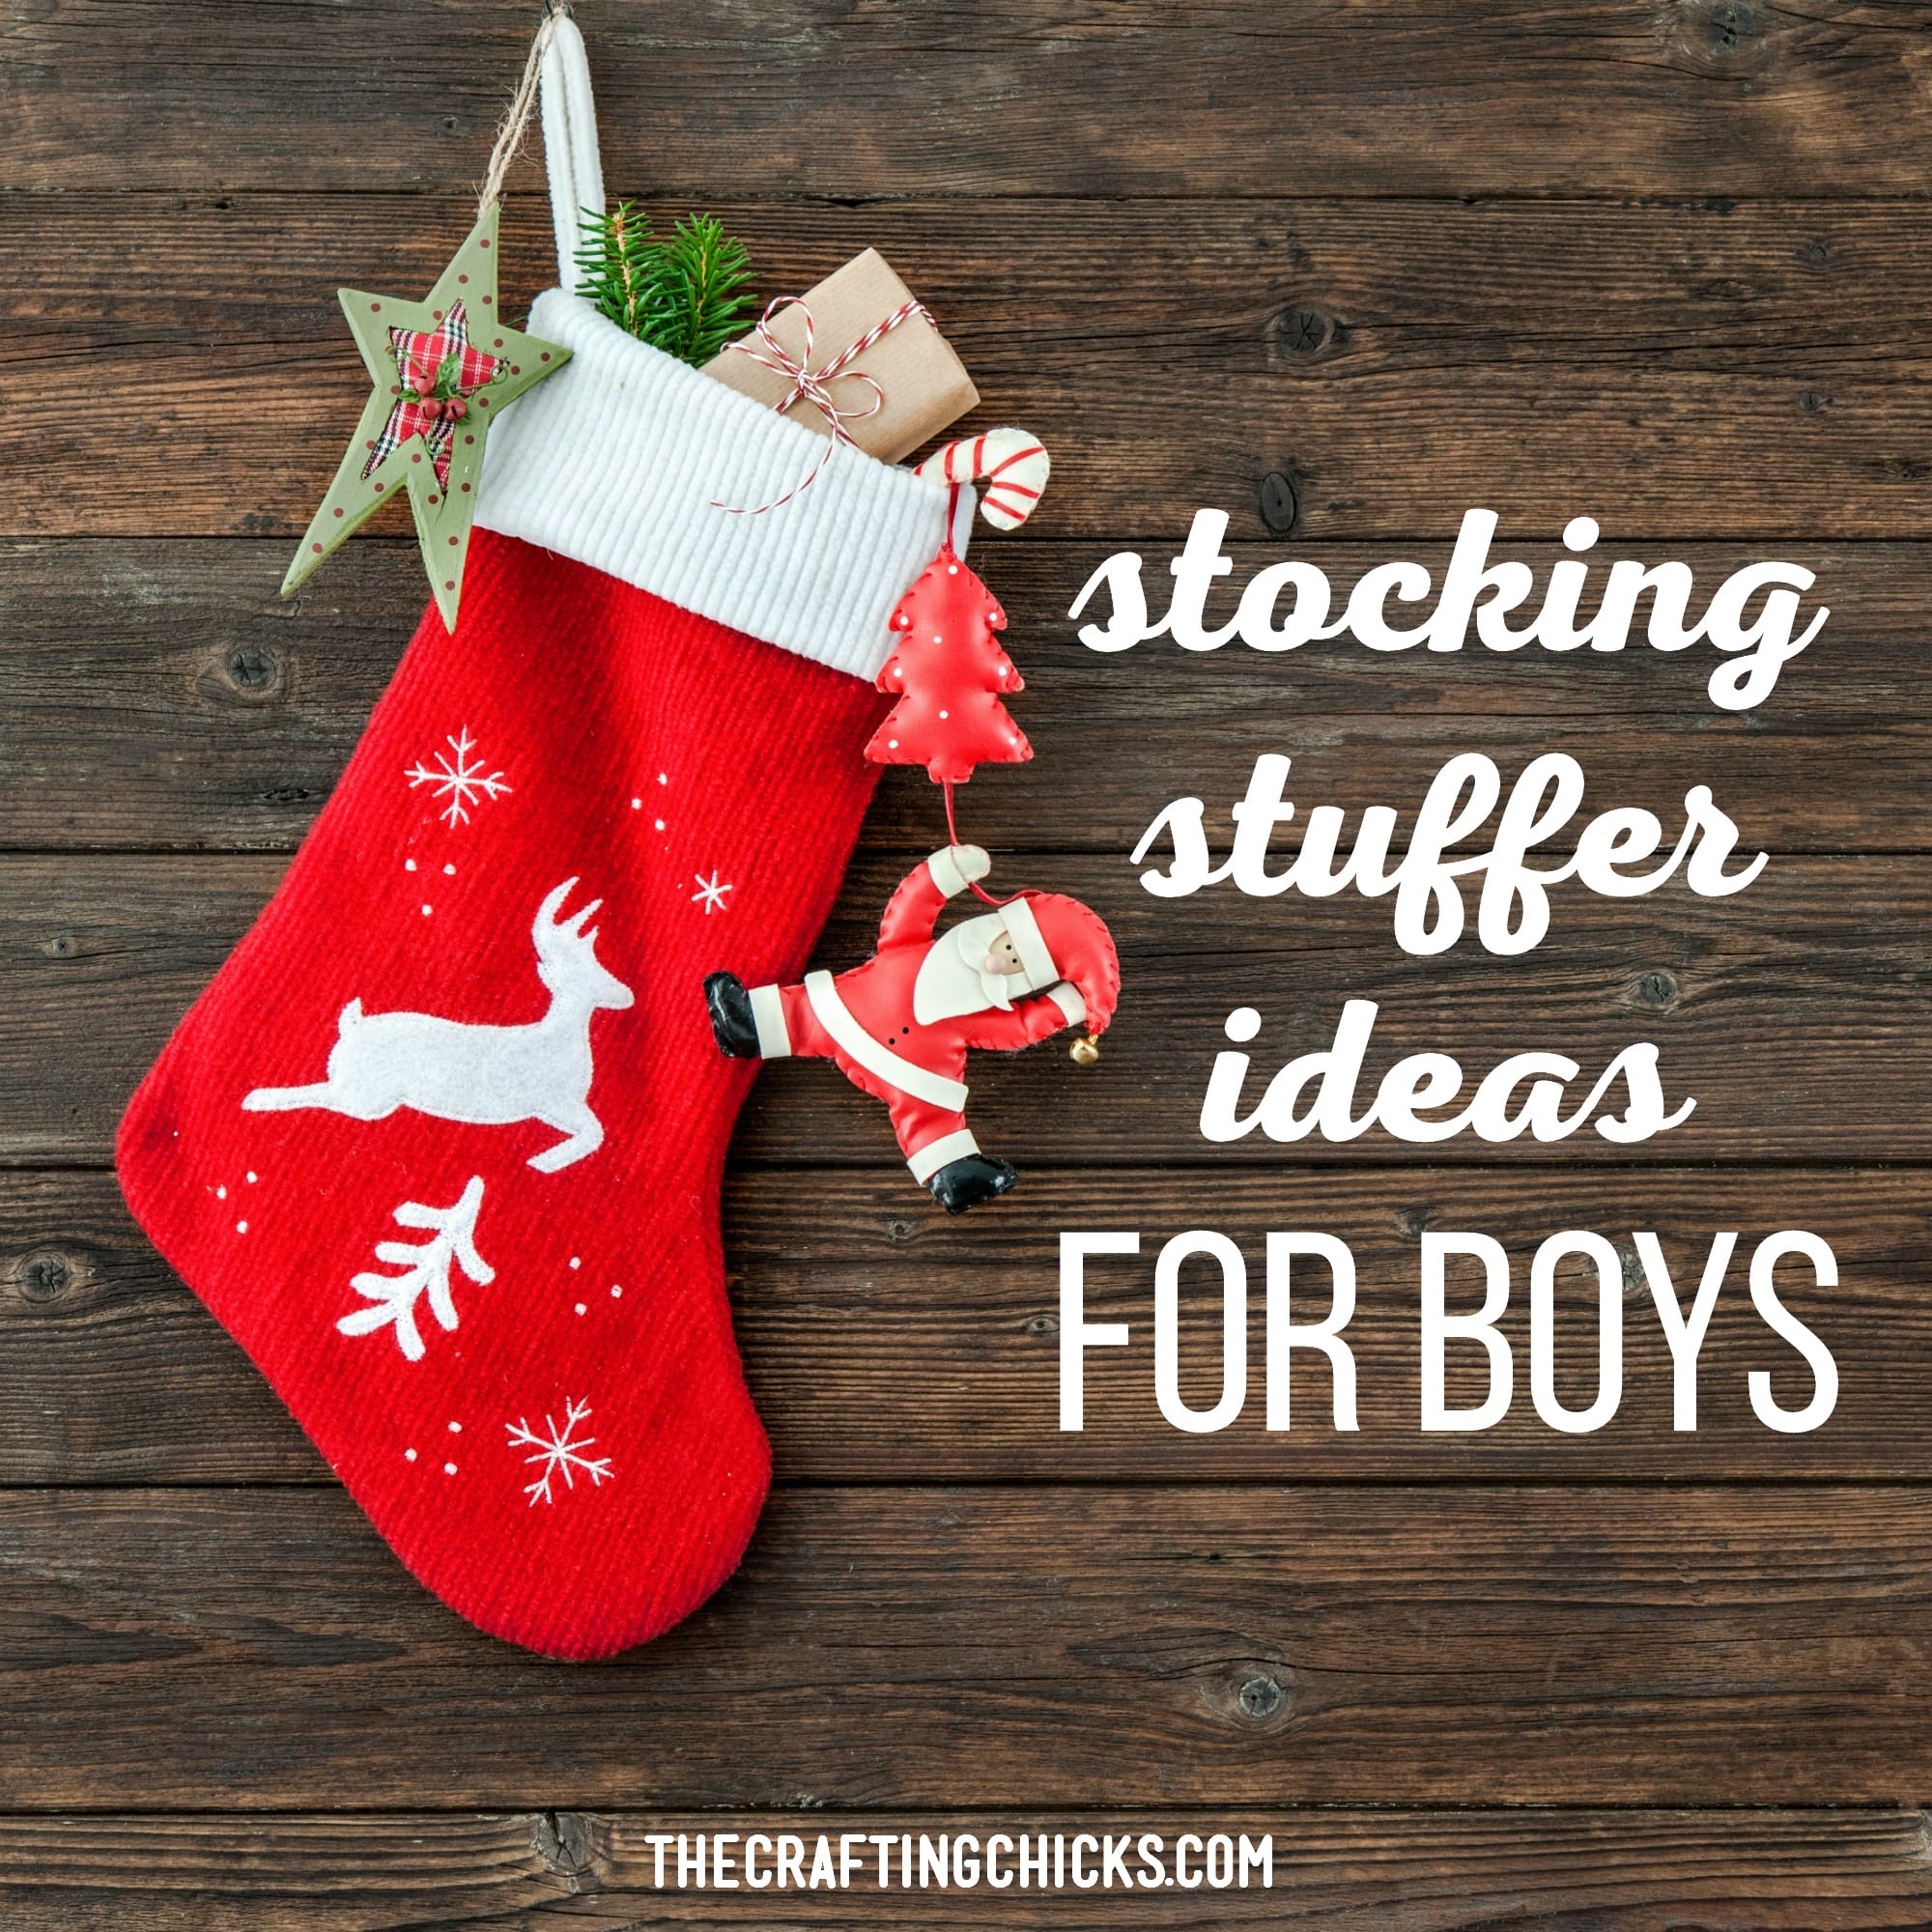 We have a great list of Stocking Stuffer Ideas for Boys. We think that any boy in your life would be happy to find these in their stockings Christmas morning.